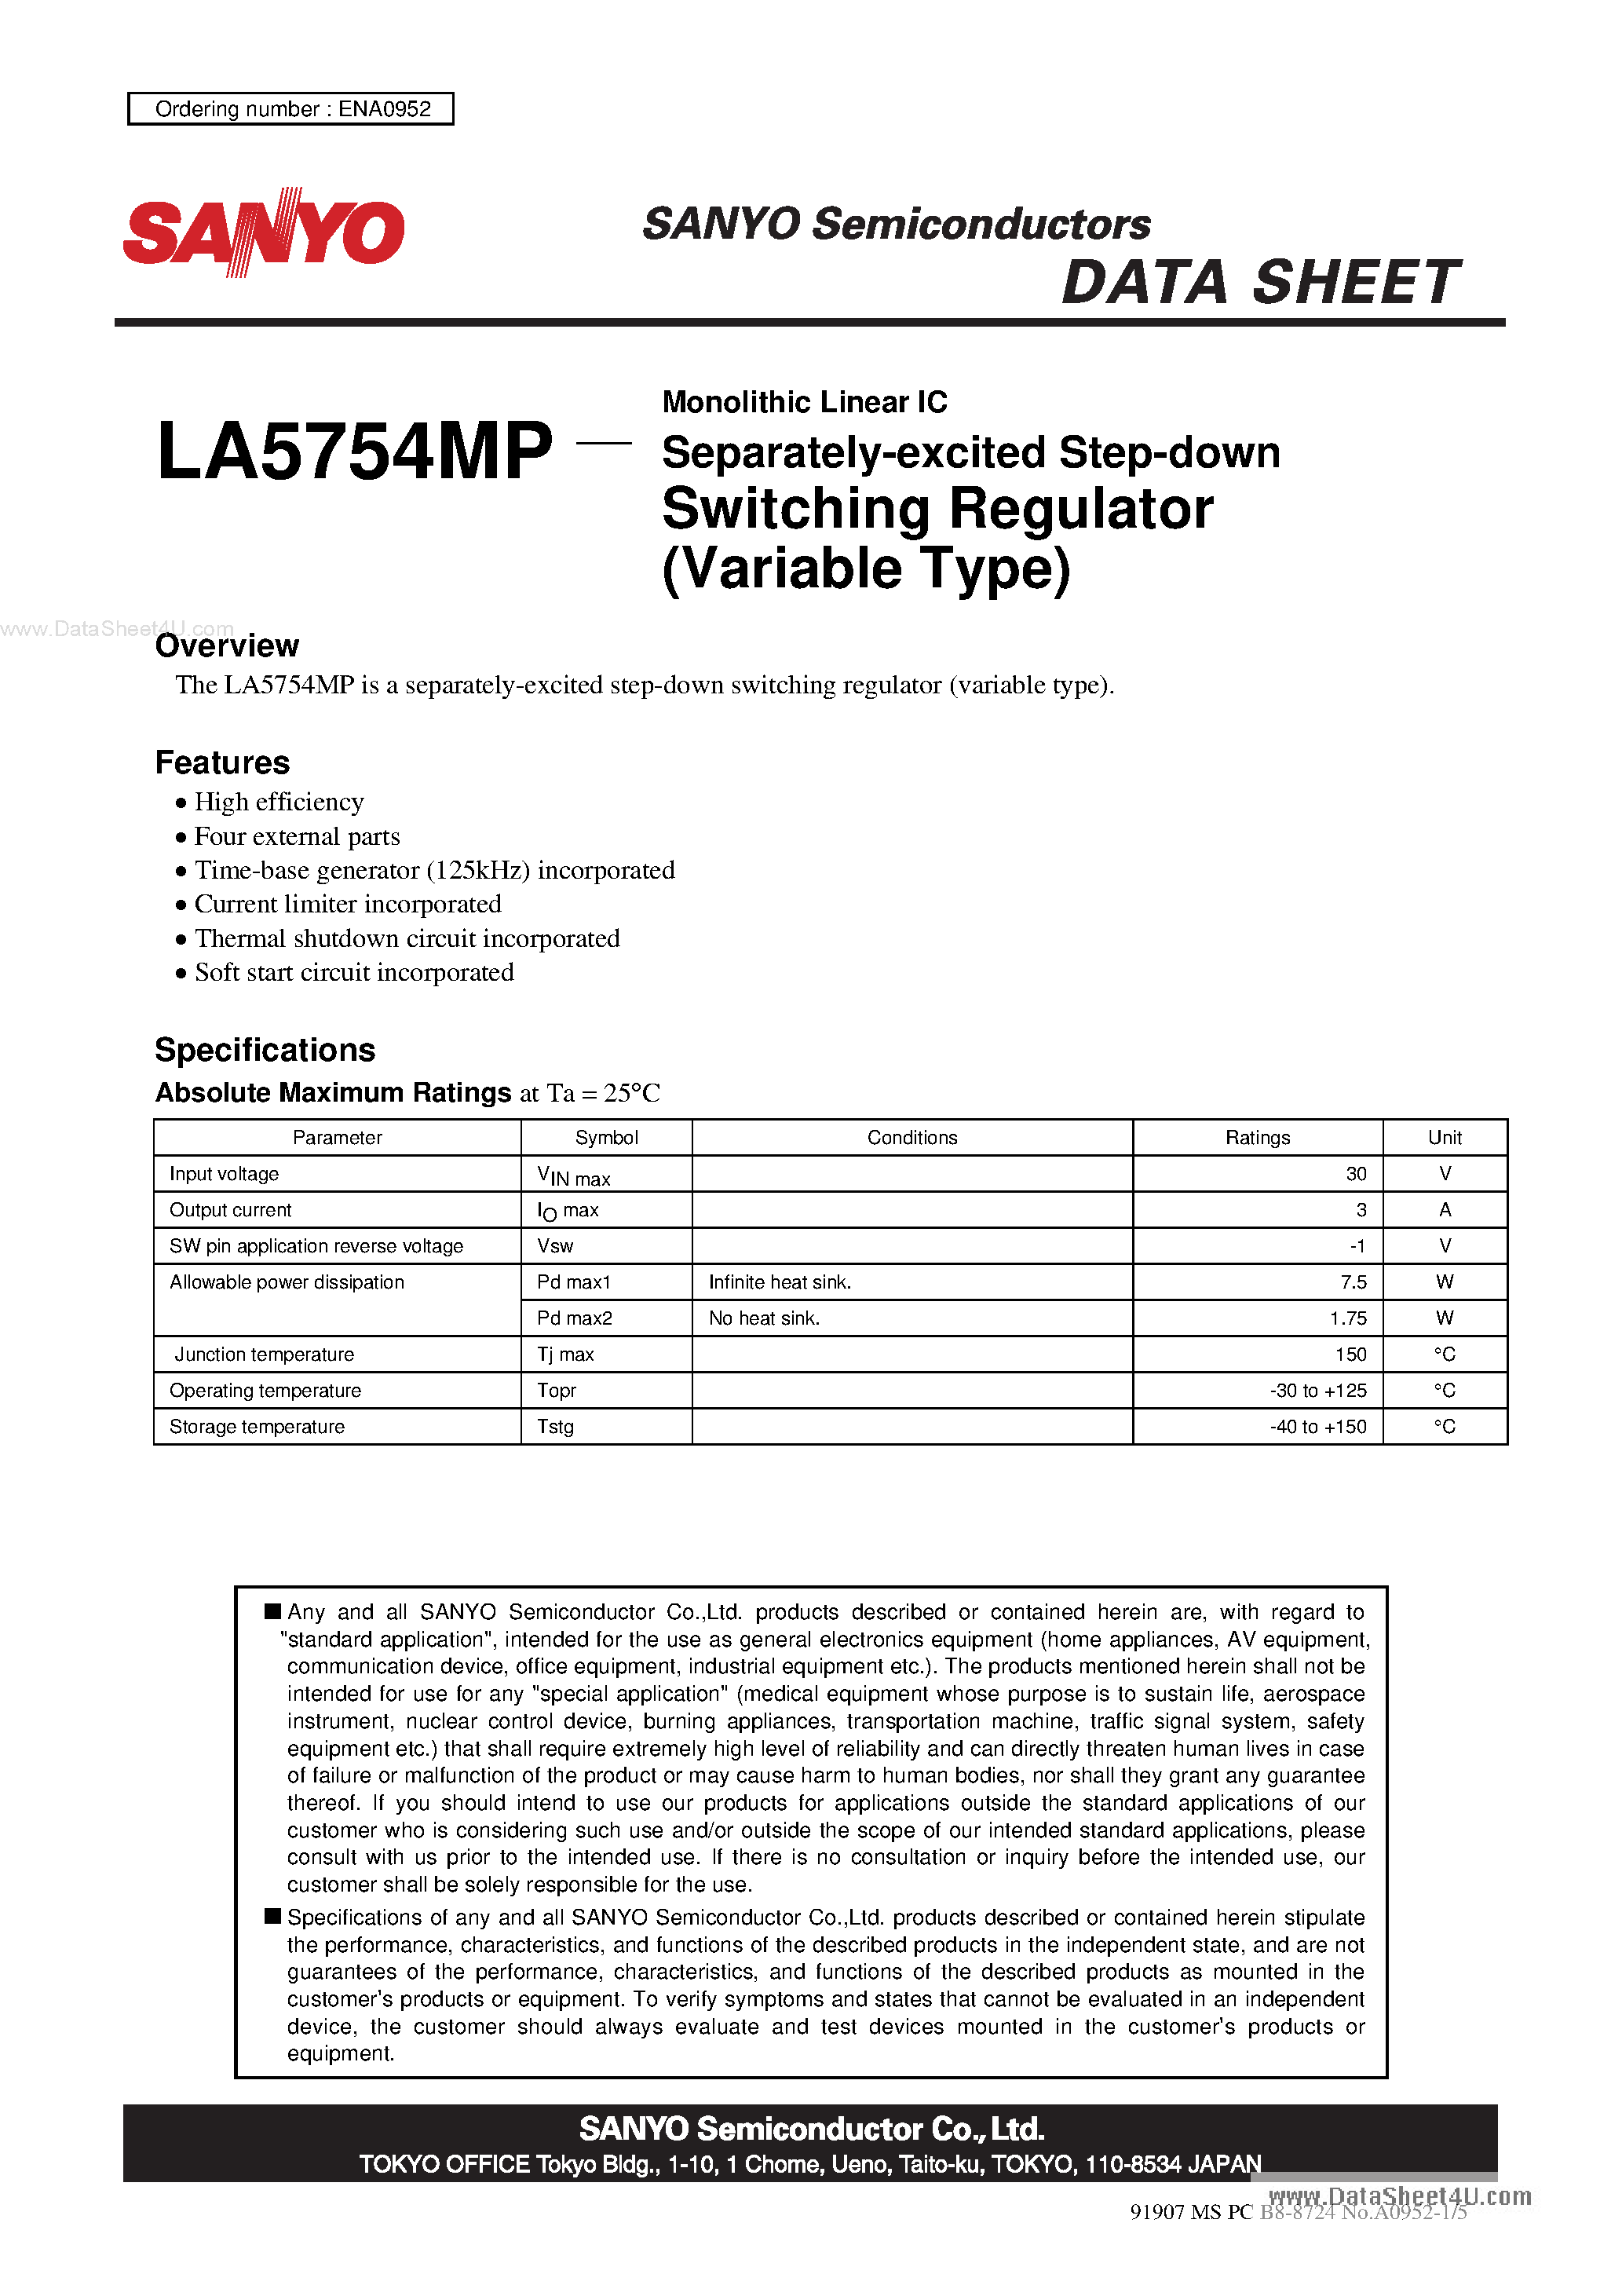 Datasheet LA5754MP - Monolithic Linear IC Separately-Excited Step-Down Switching Regulator page 1